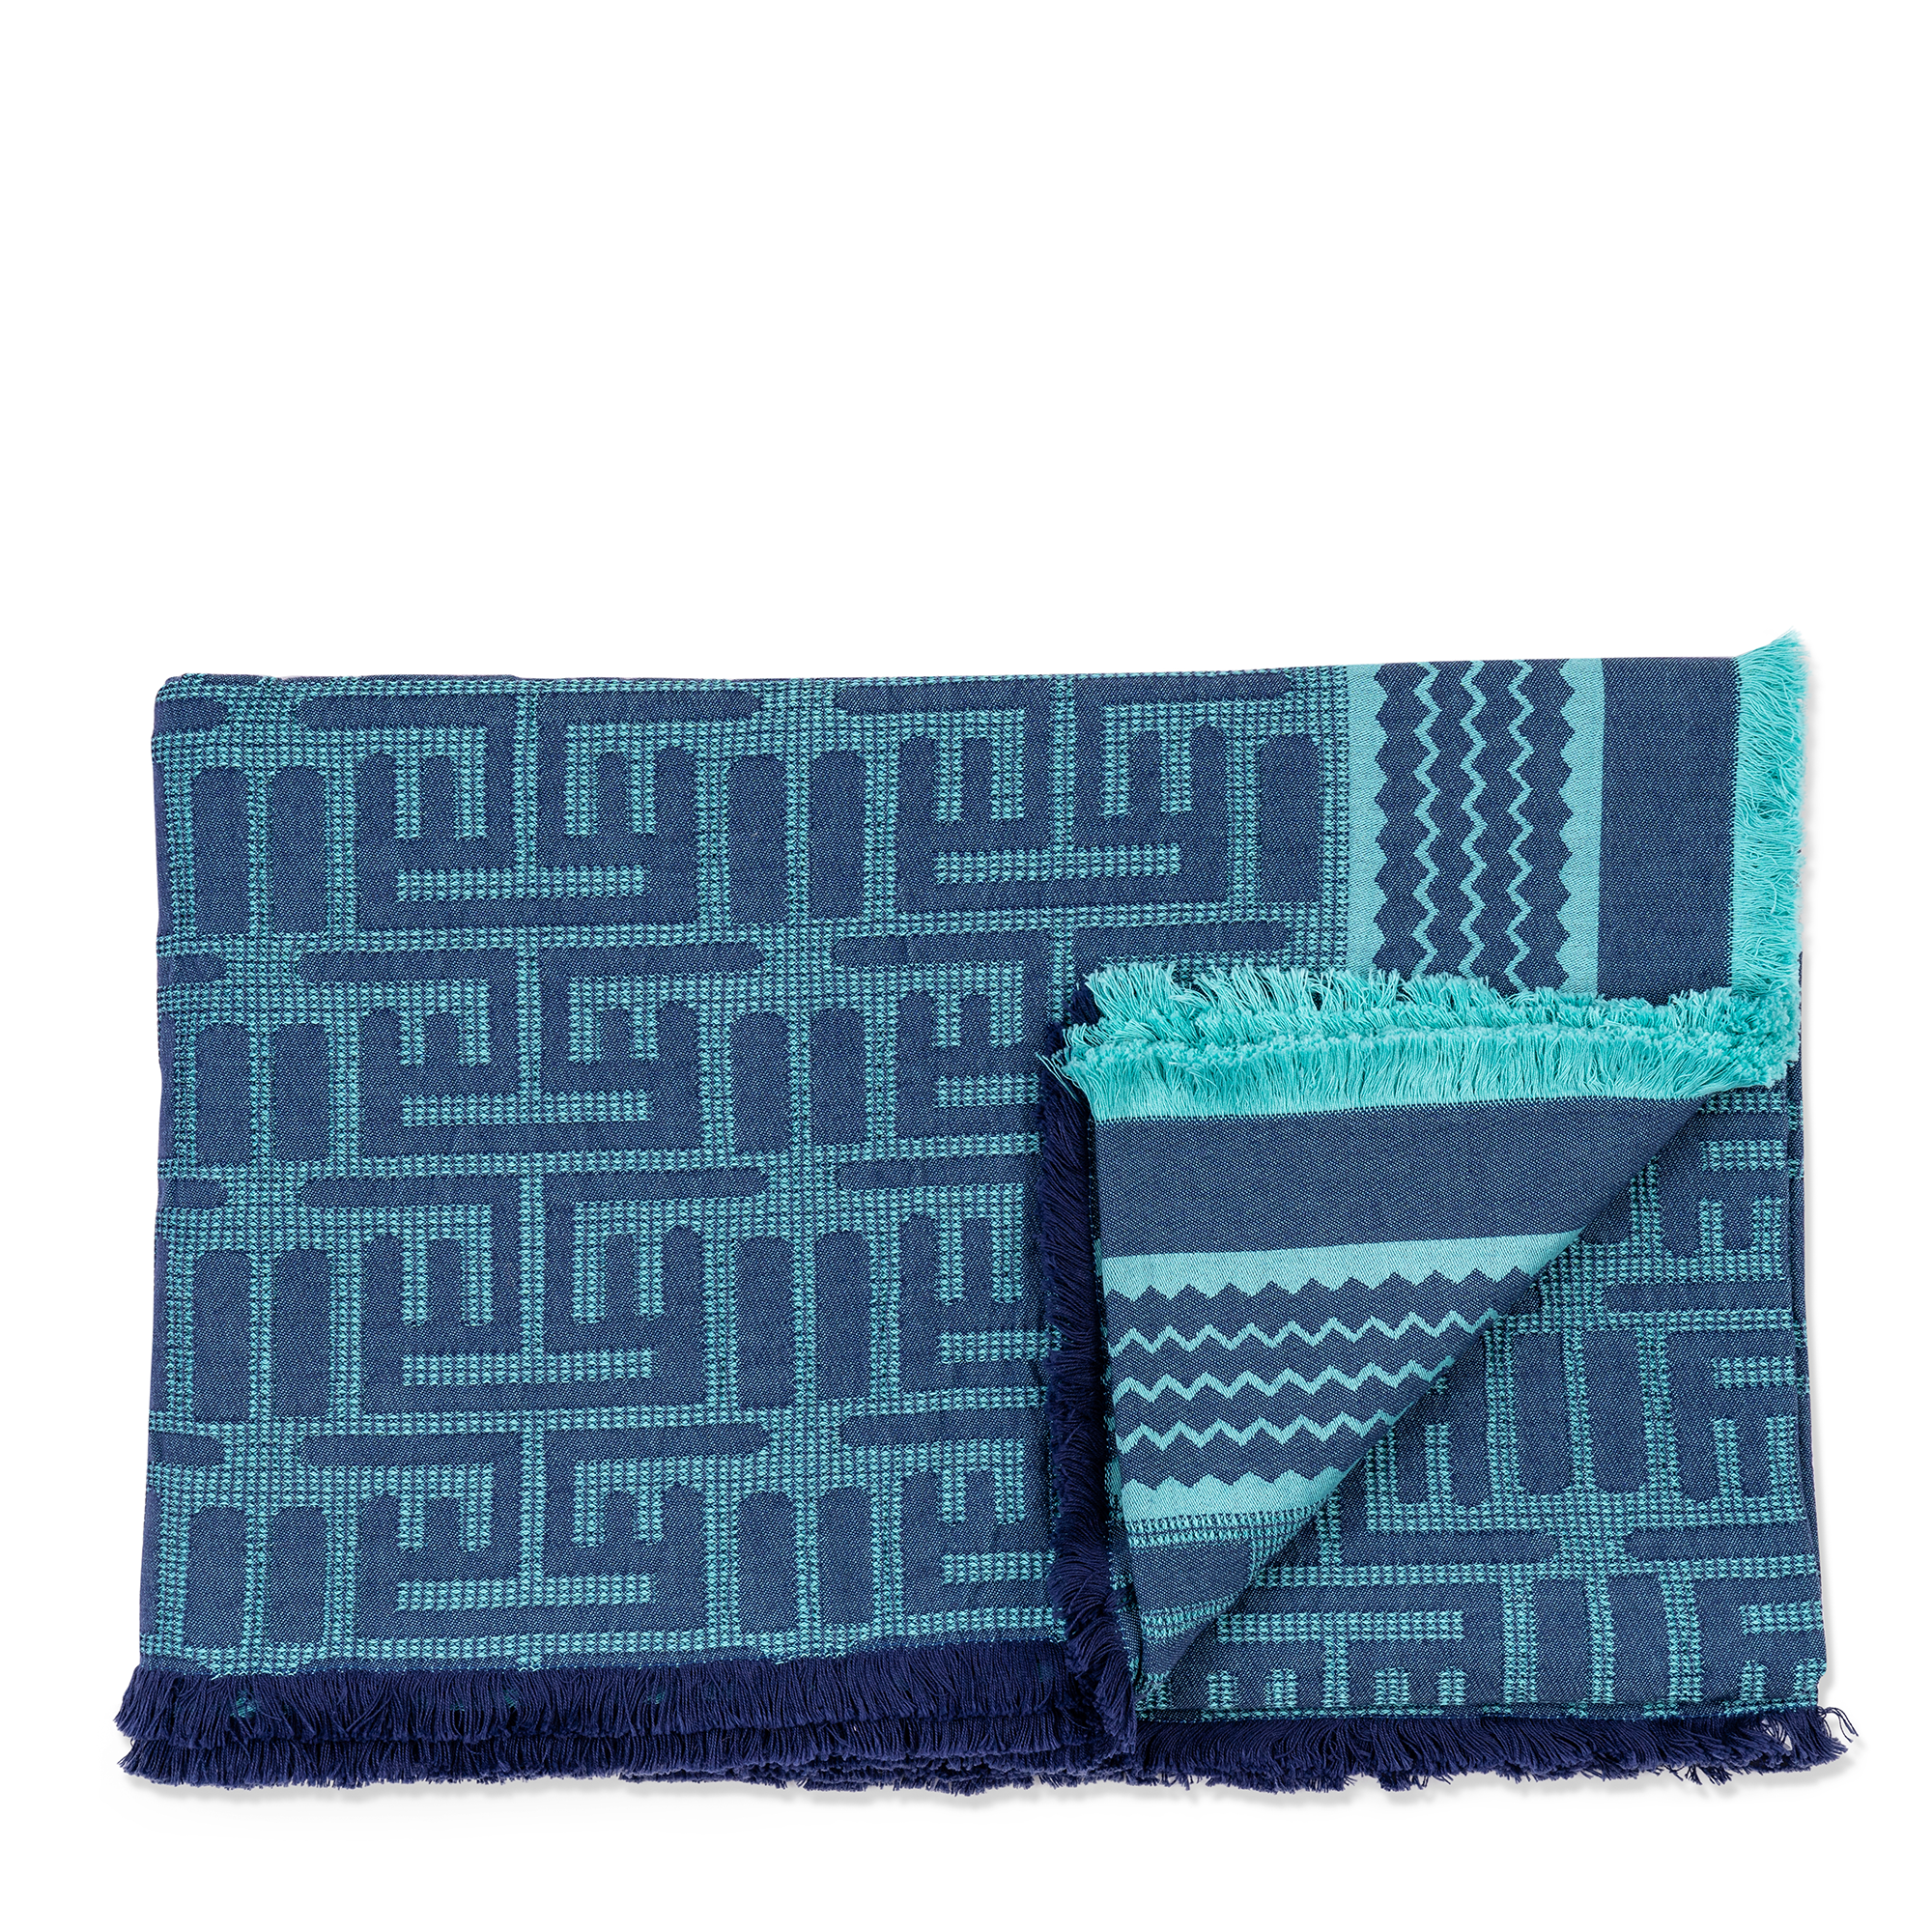 A blue and turquoise beach mat with a geometric pattern, featuring 100% cotton fabric. This beach mat is lightweight and portable, ideal for beach outings and picnics.